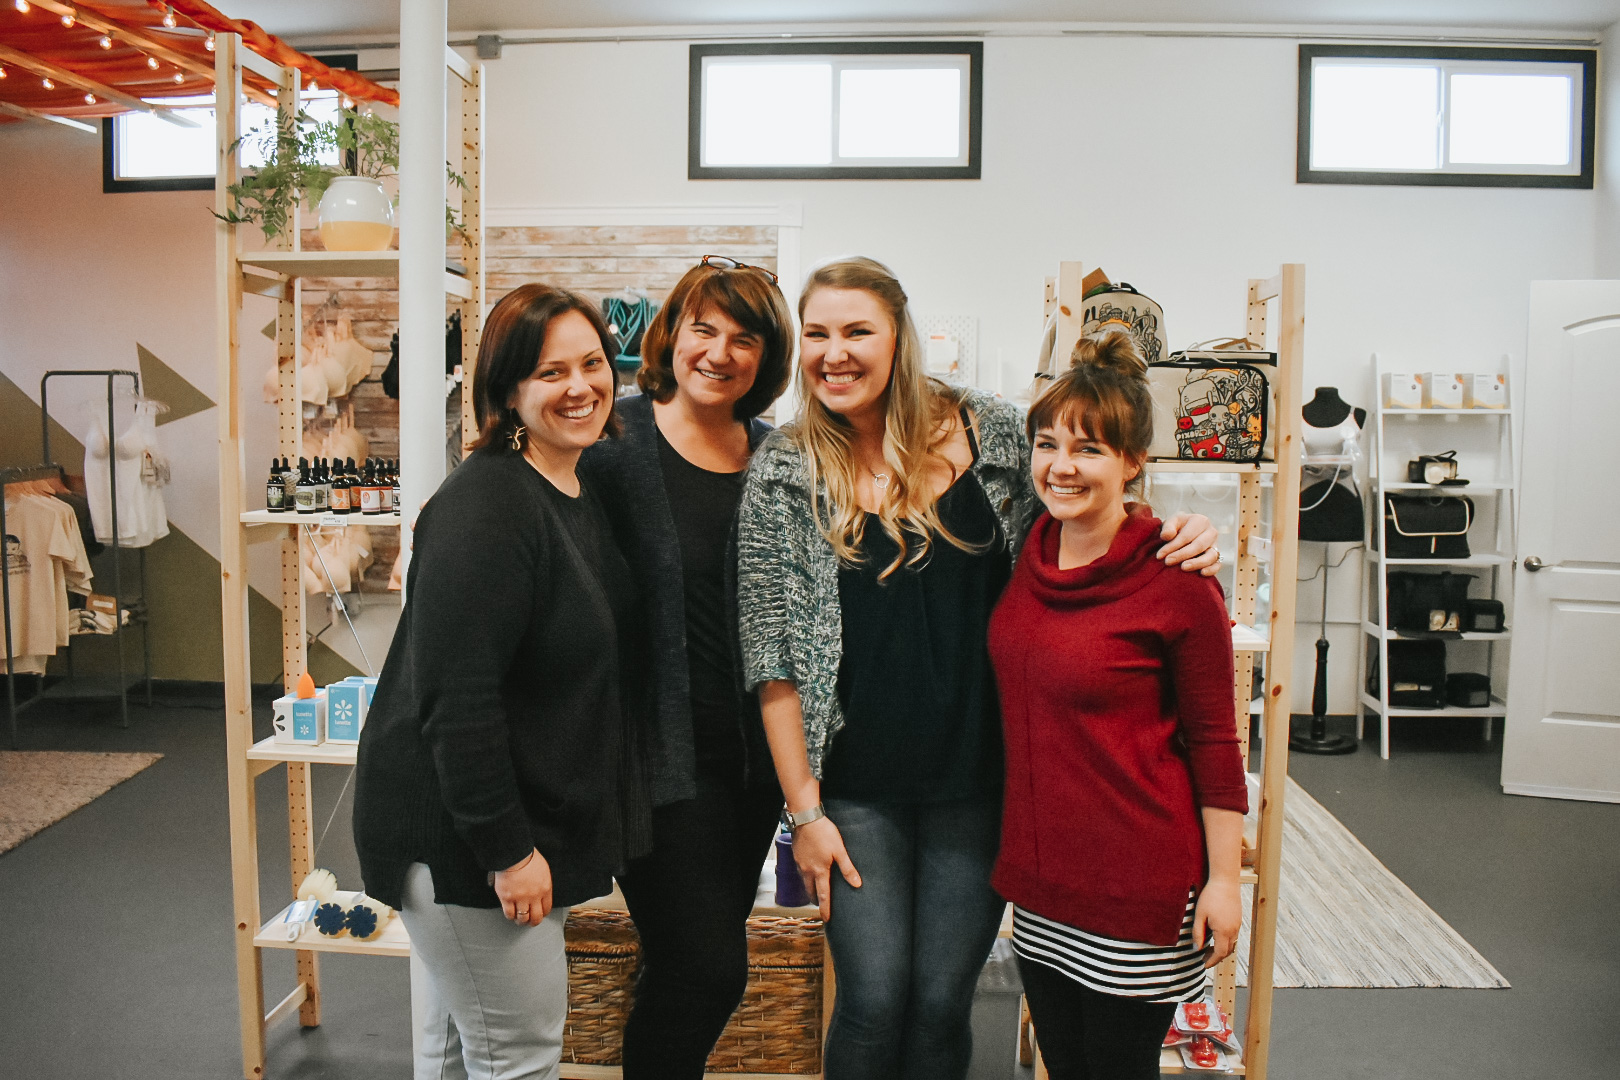 Photo of Fern + Foster founders Danielle (far left) and Emily (far right), with Nurturing Expressions founder Tracy Corey (mid-left) and staff Jenn